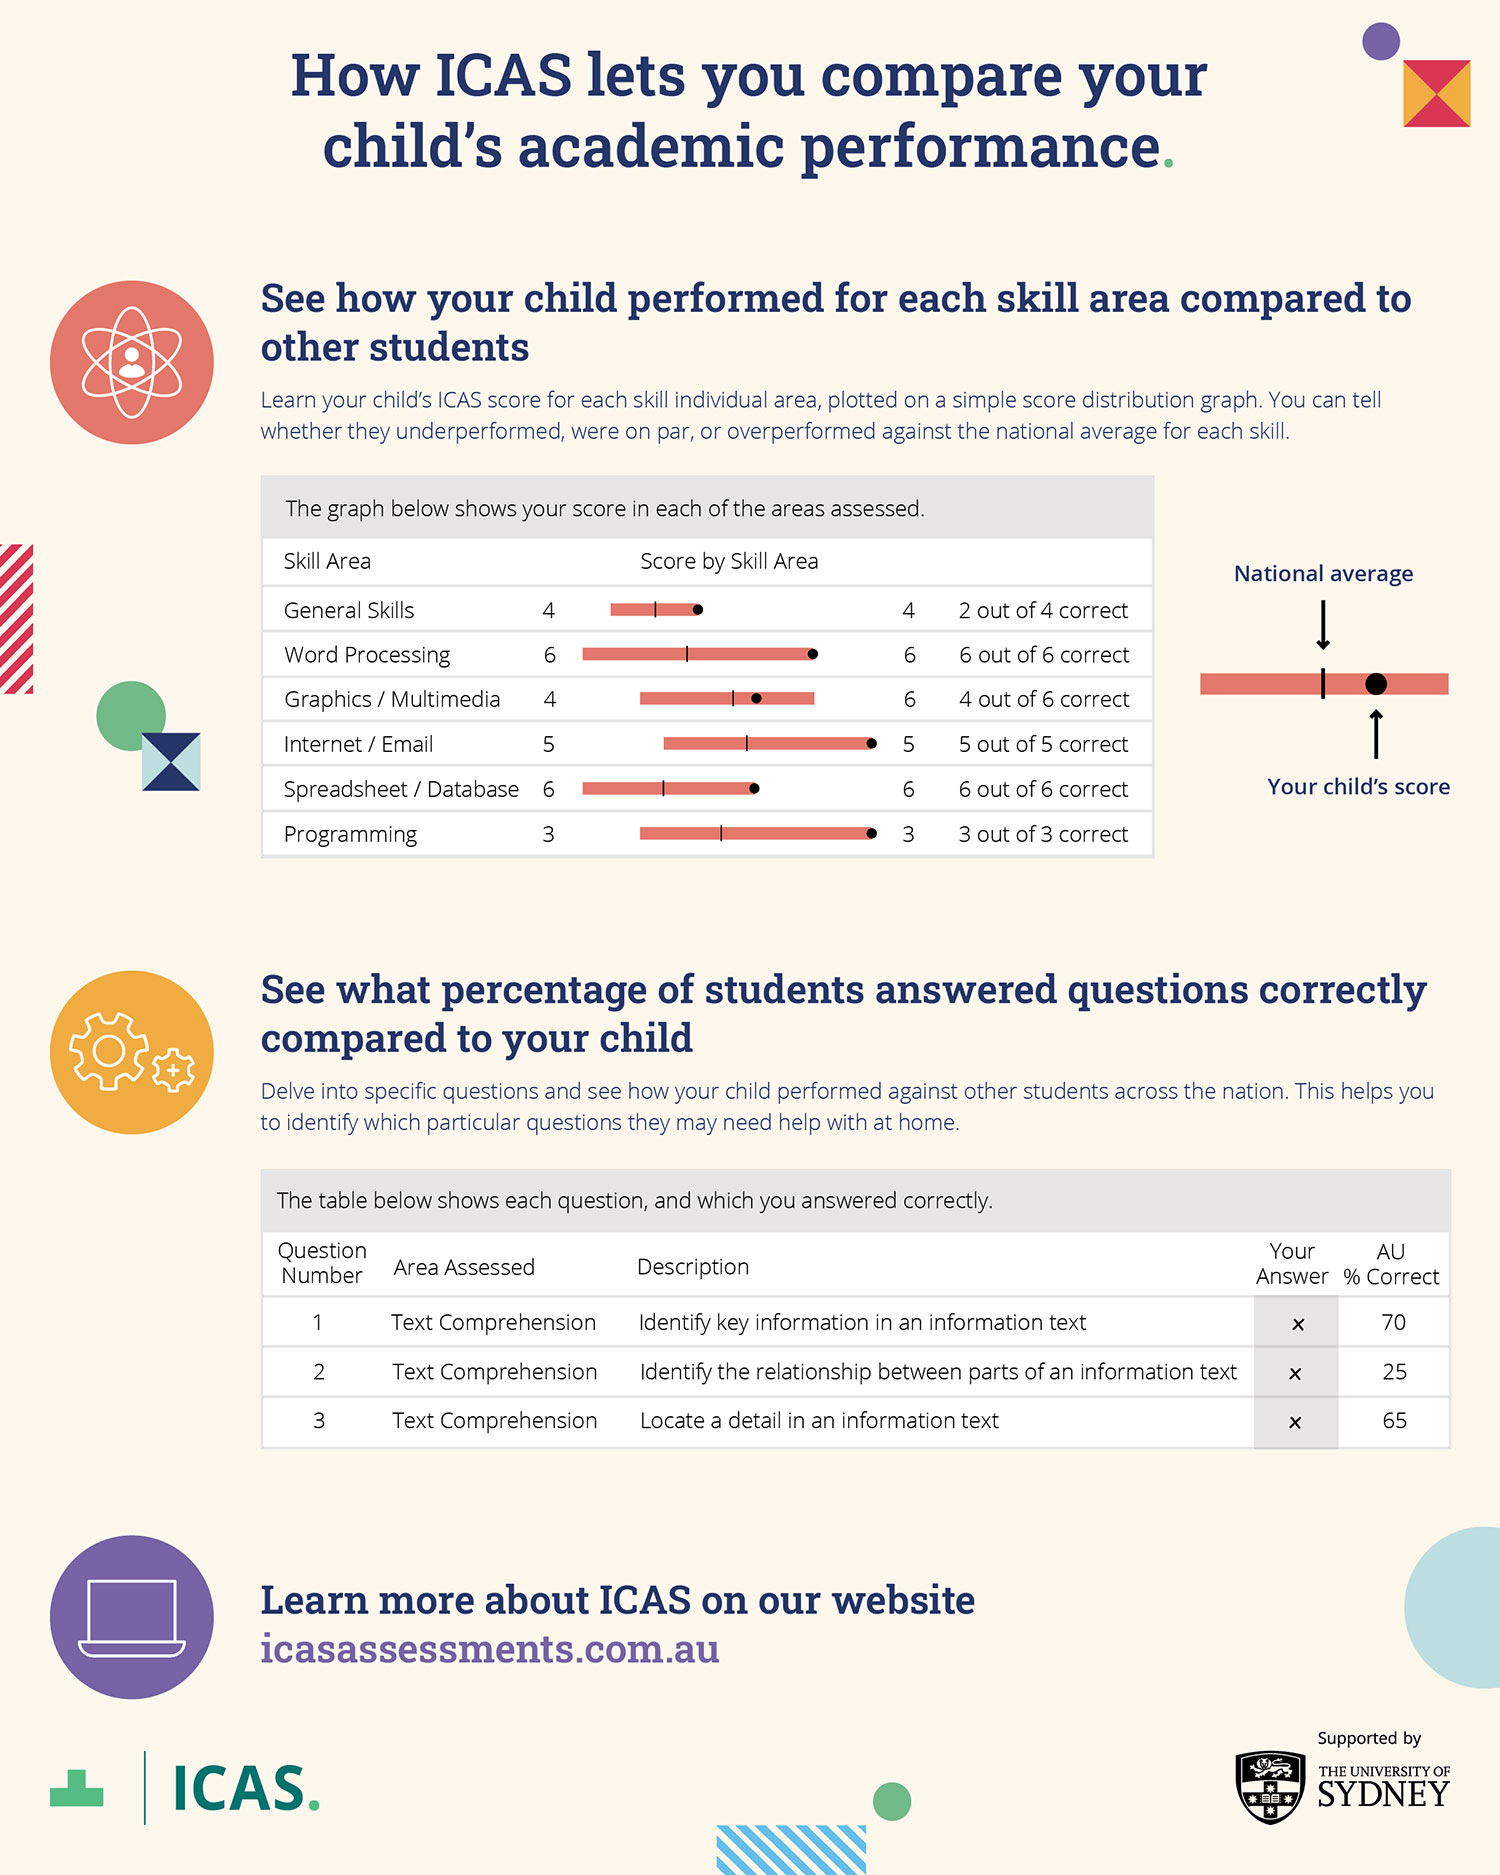 how icas lets you compare your child's performance